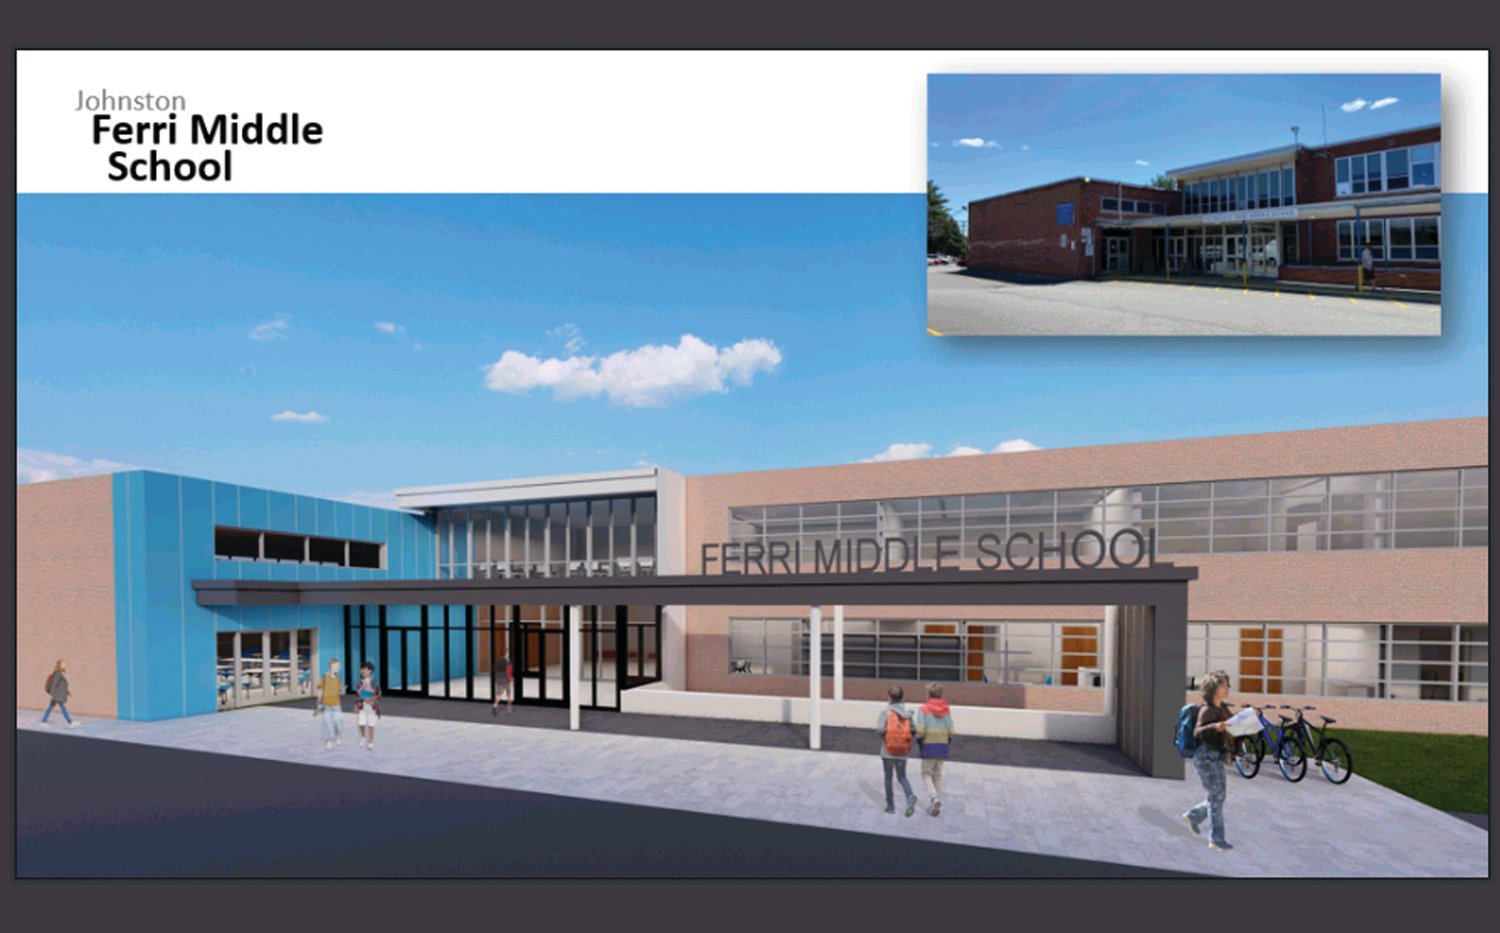 FERRI MIDDLE SCHOOL: Planners hope to unveil the new Johnston middle school in late summer of 2025. The middle school will be built to accommodate 1,066 students in grades 5-8.